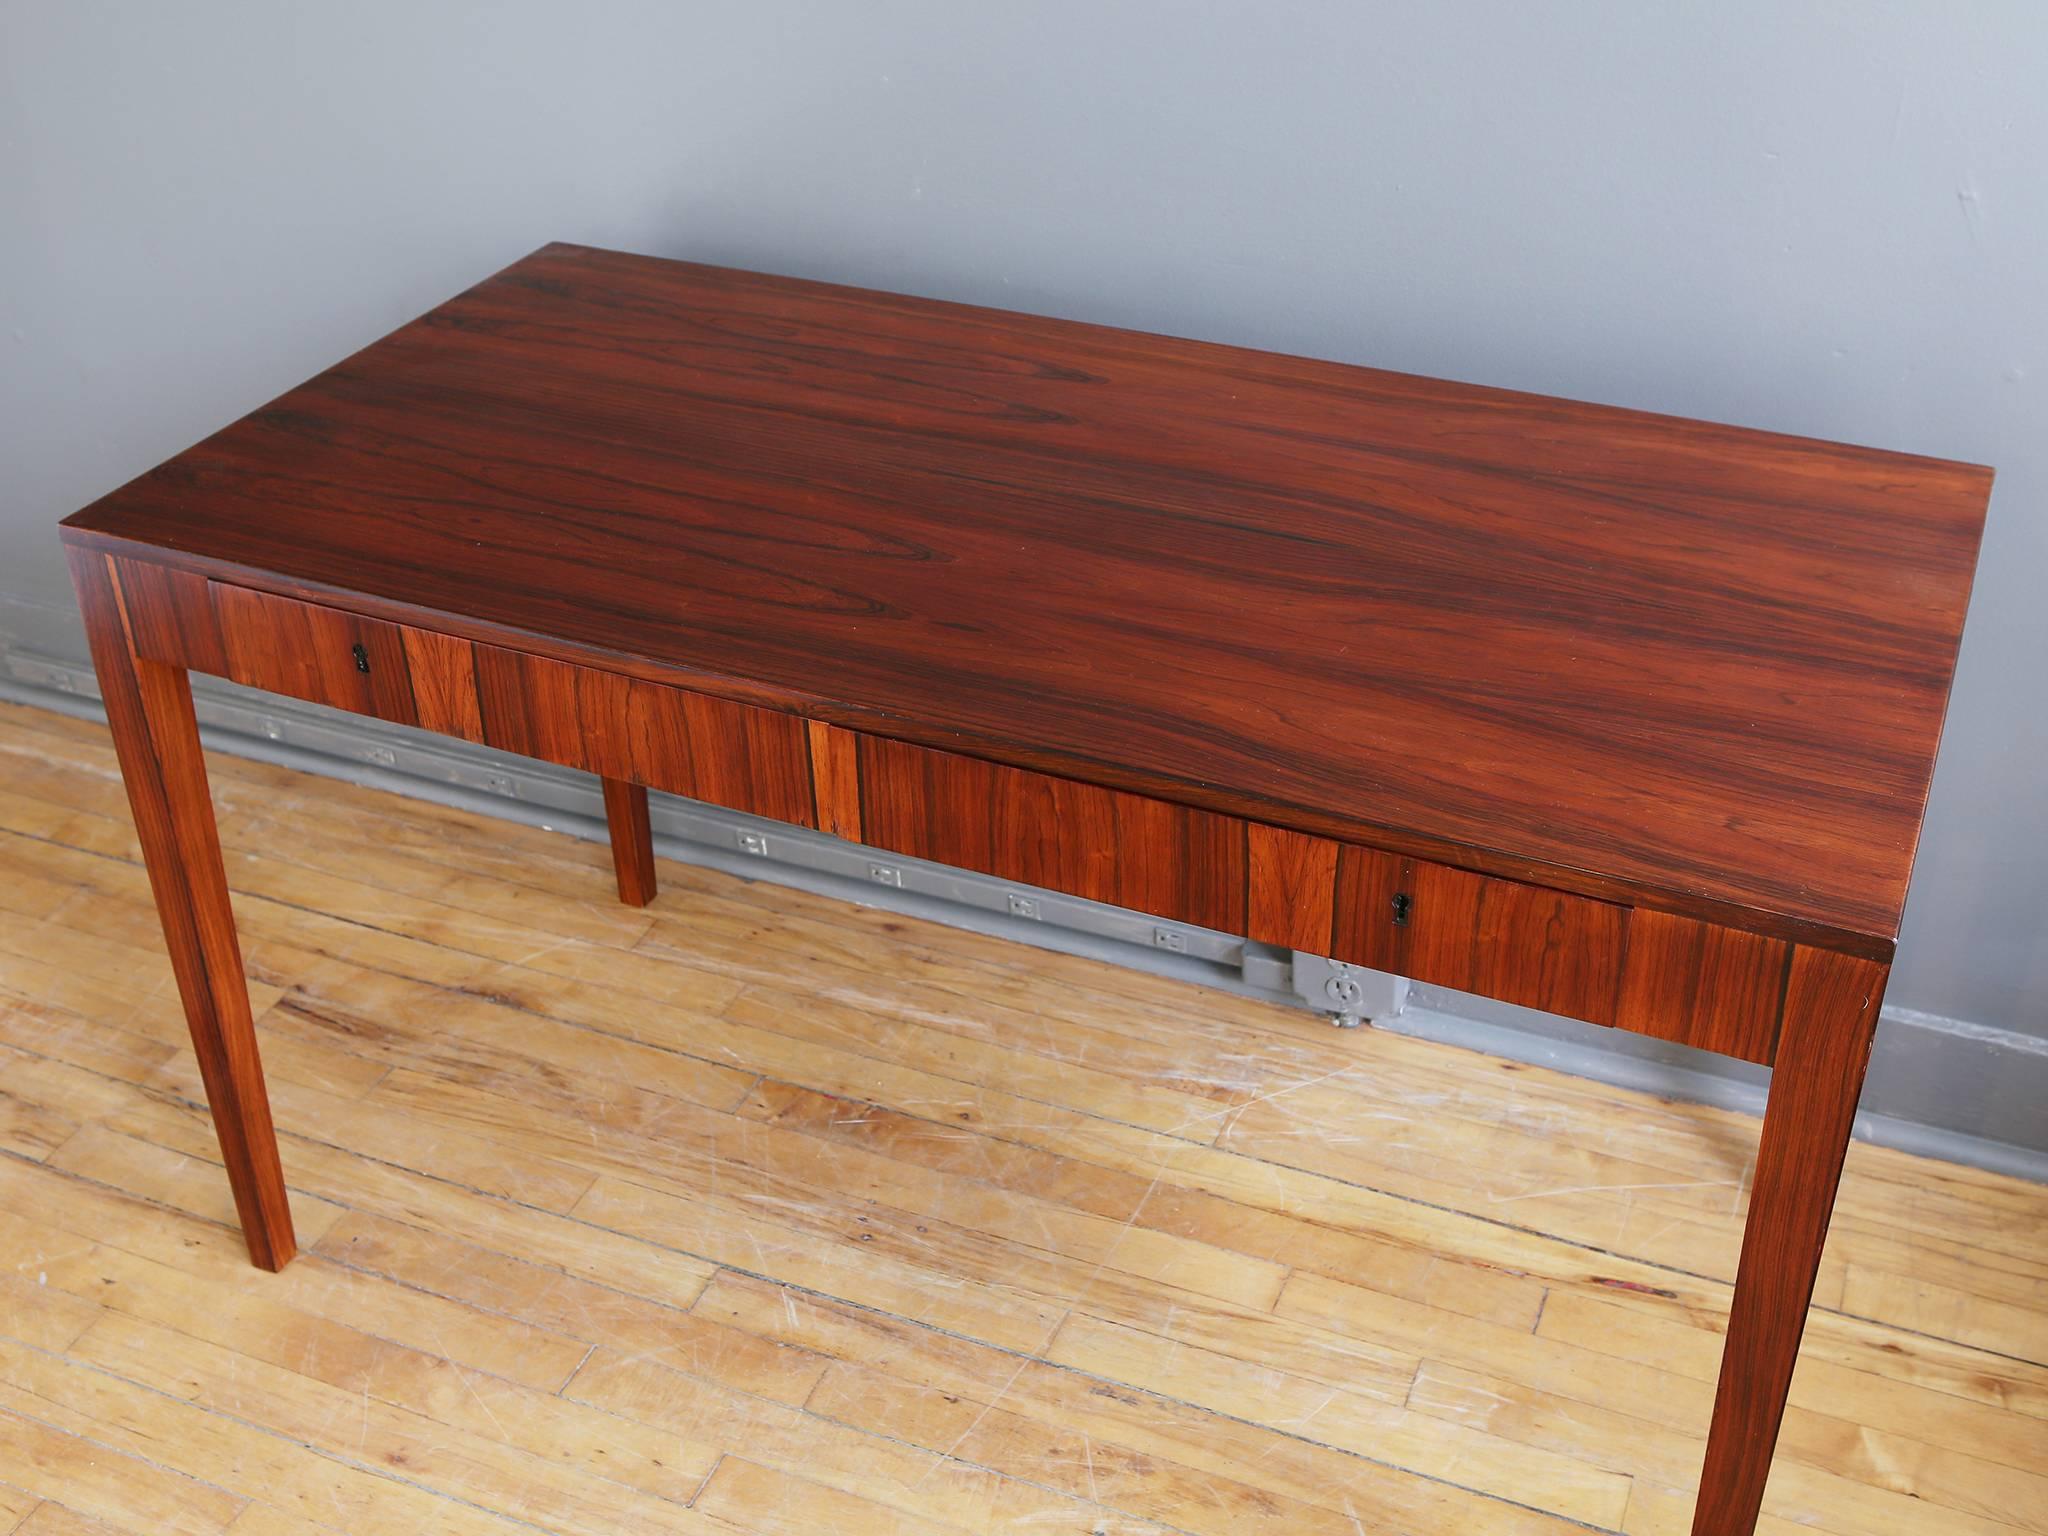 A smart Danish rosewood writing desk or library table by Riis Antonsen, circa 1950. Featuring a beautifully grained work surface with two generous drawers supported by four tapered legs. Finely made with mahogany secondary woods. 

Recently